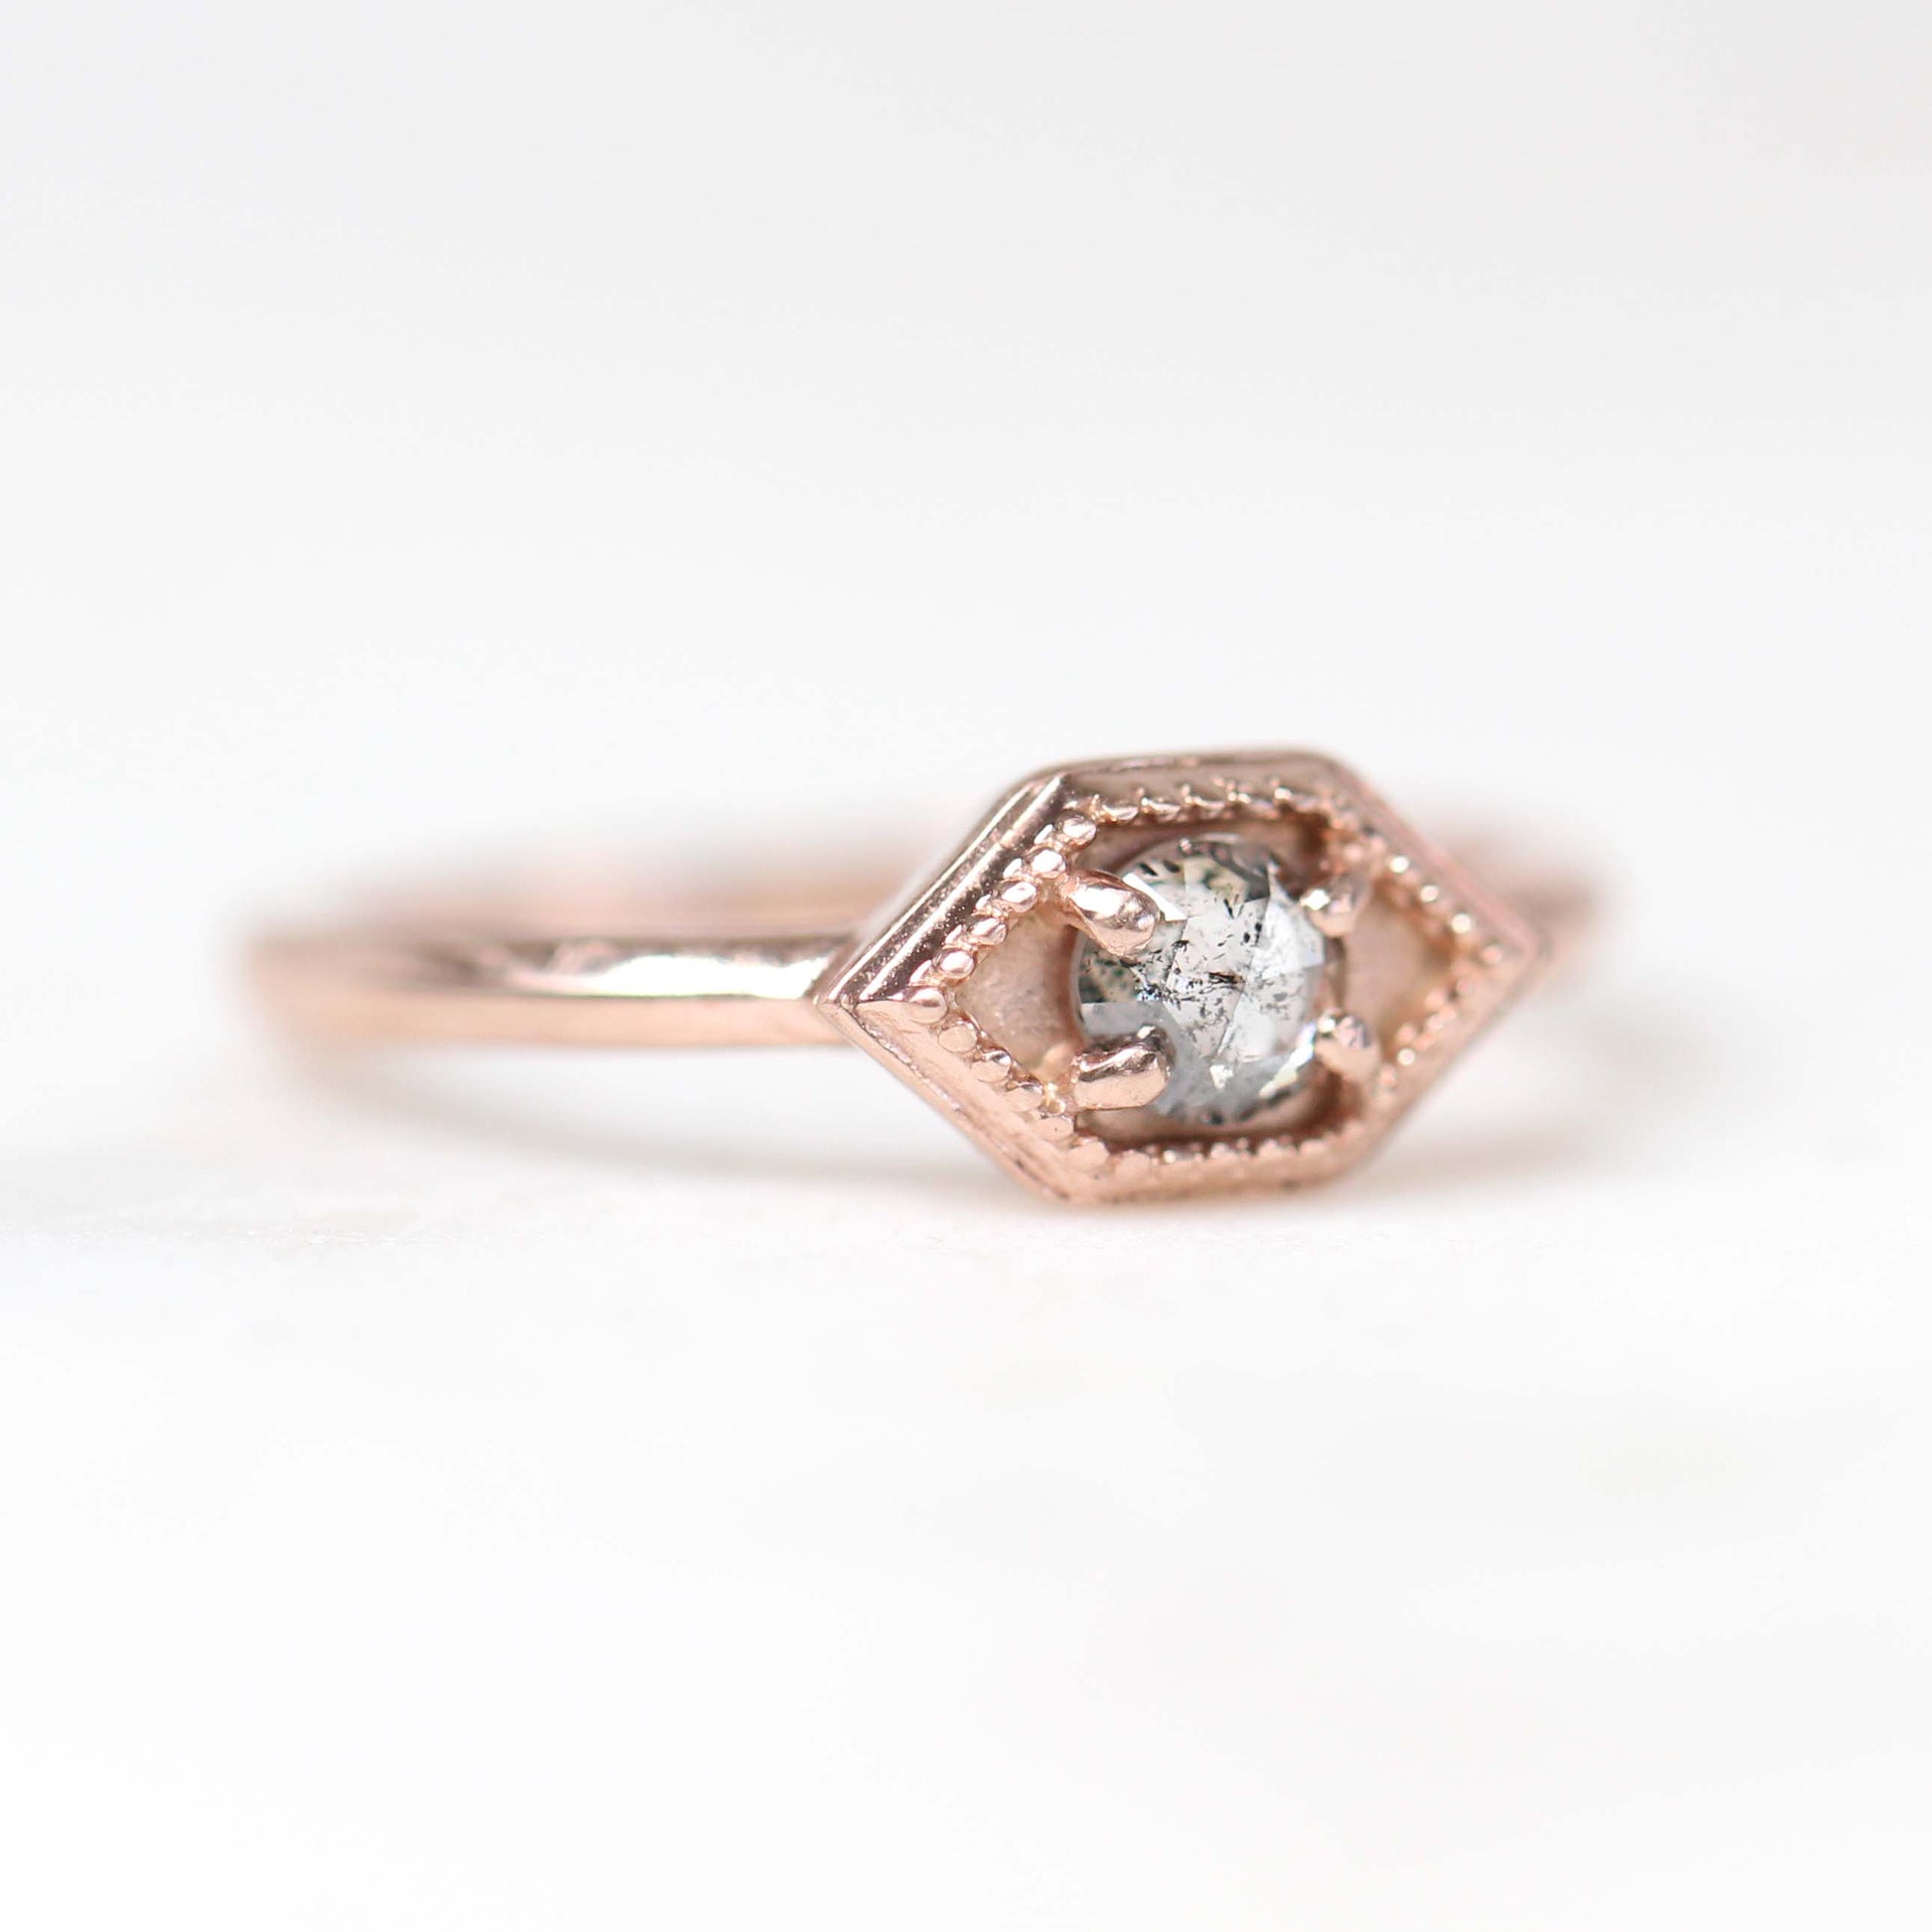 Melissa Ring with a 0.26 Carat Round Dark Celestial Diamond in 10k Rose Gold - Ready to Size and Ship - Midwinter Co. Alternative Bridal Rings and Modern Fine Jewelry